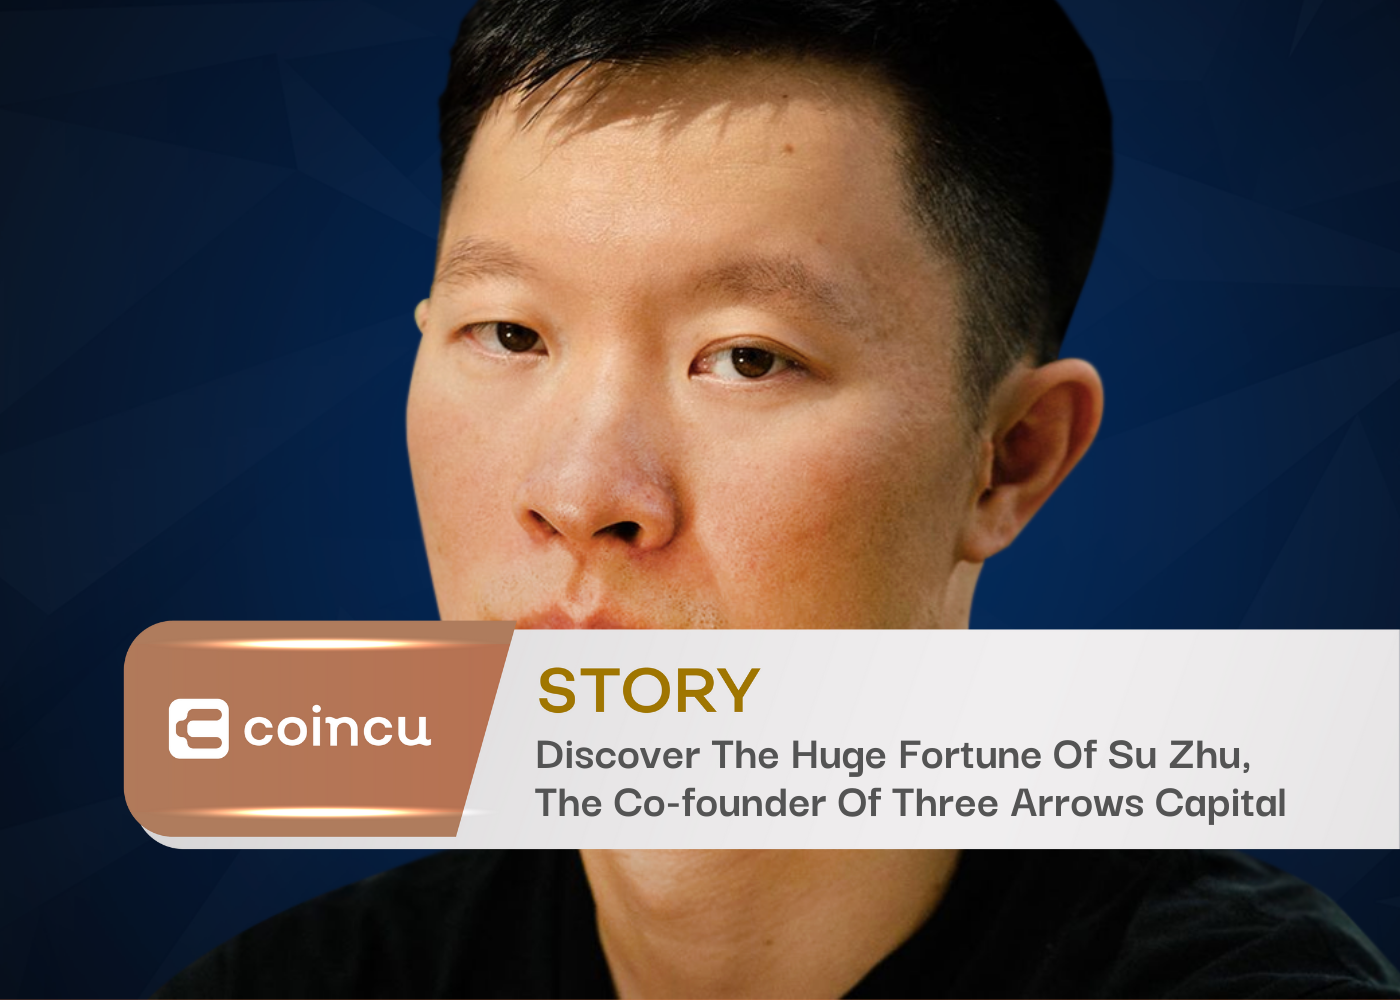 Discover The Huge Fortune Of Su Zhu, The Co-founder Of Three Arrows Capital